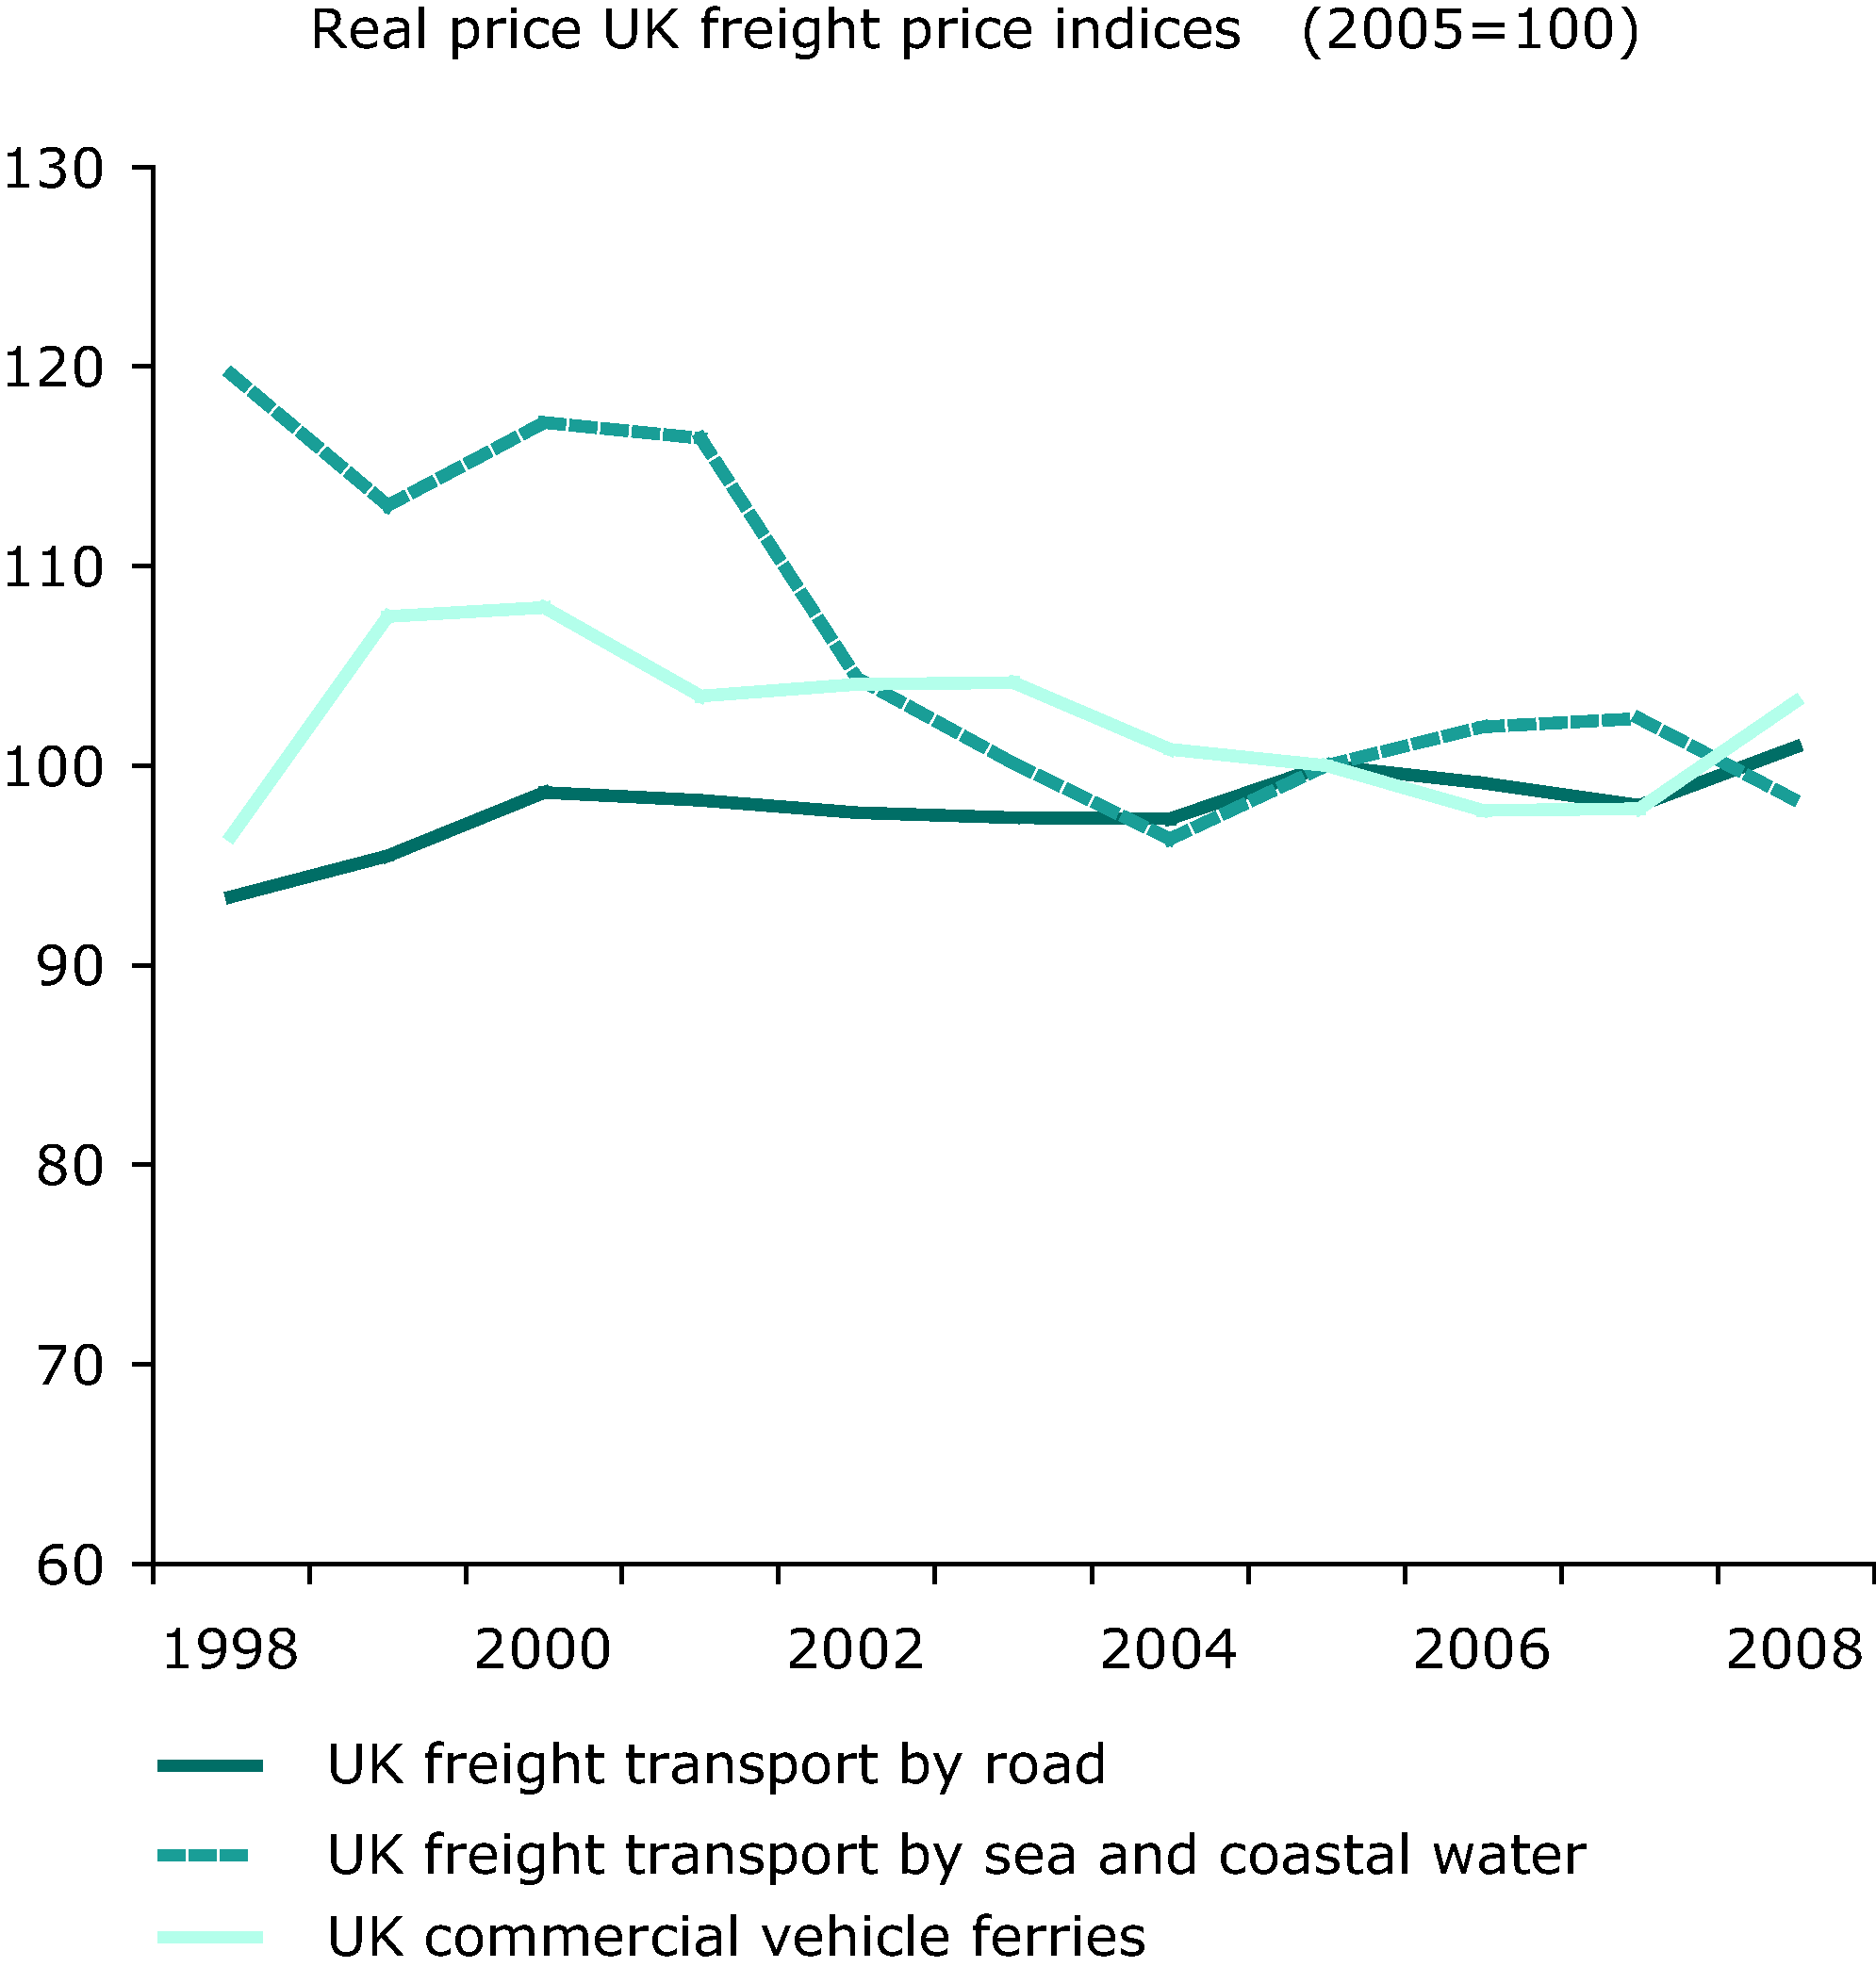 Real Price UK Freight Price Indices (2005=100)